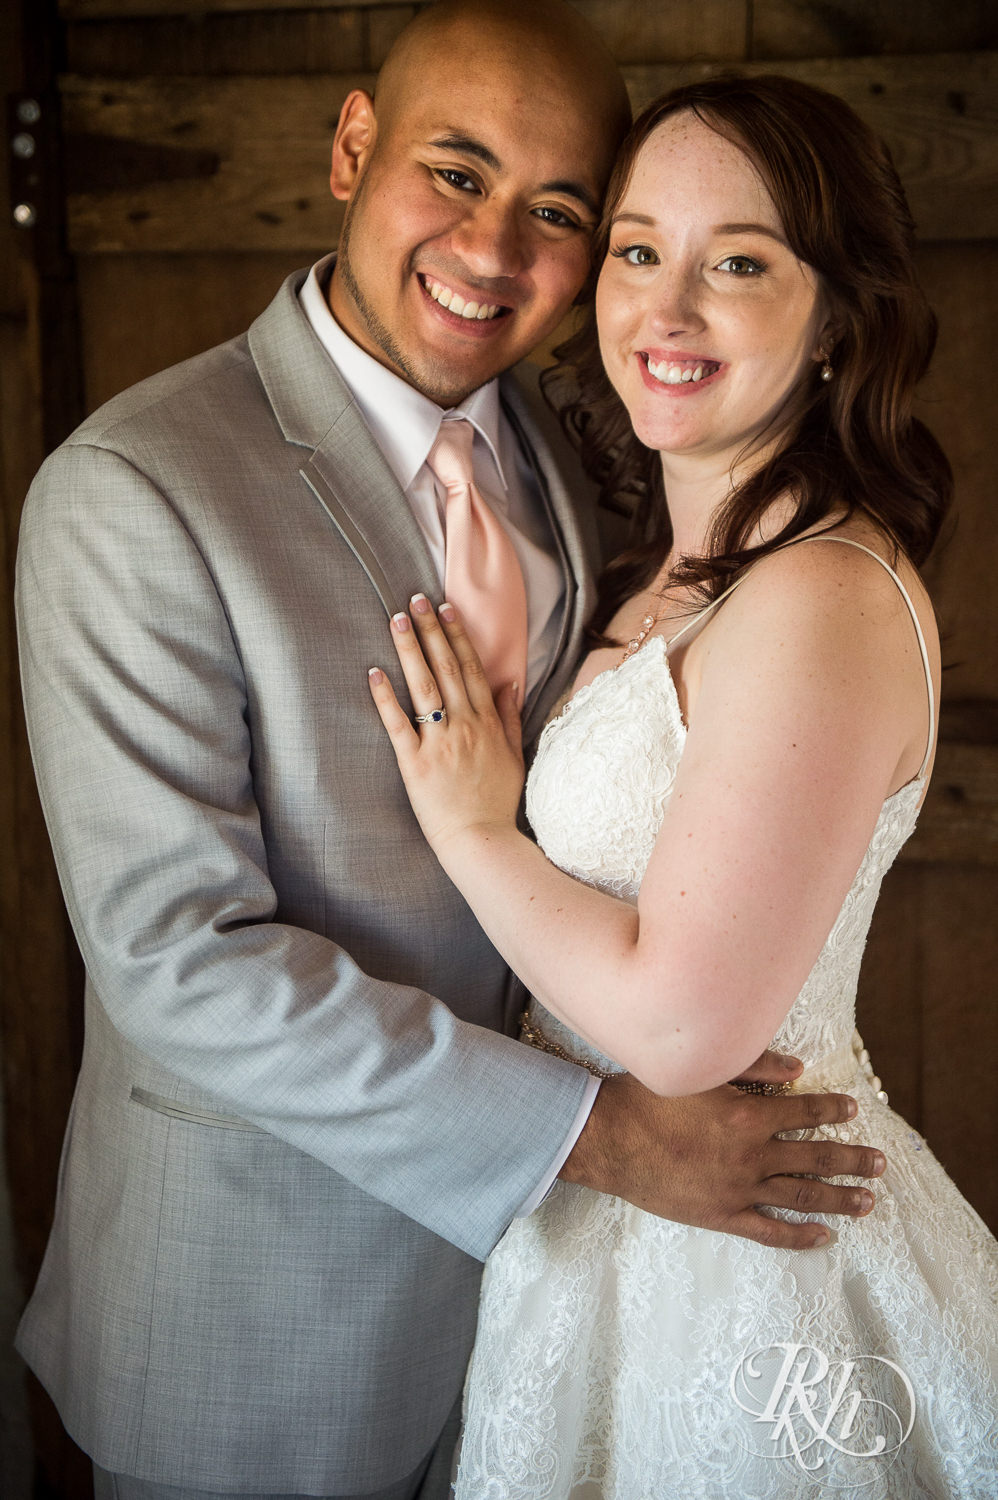 Asian groom and bride smile on wedding day at Birch Hill Barn in Glenwood City, Wisconsin.